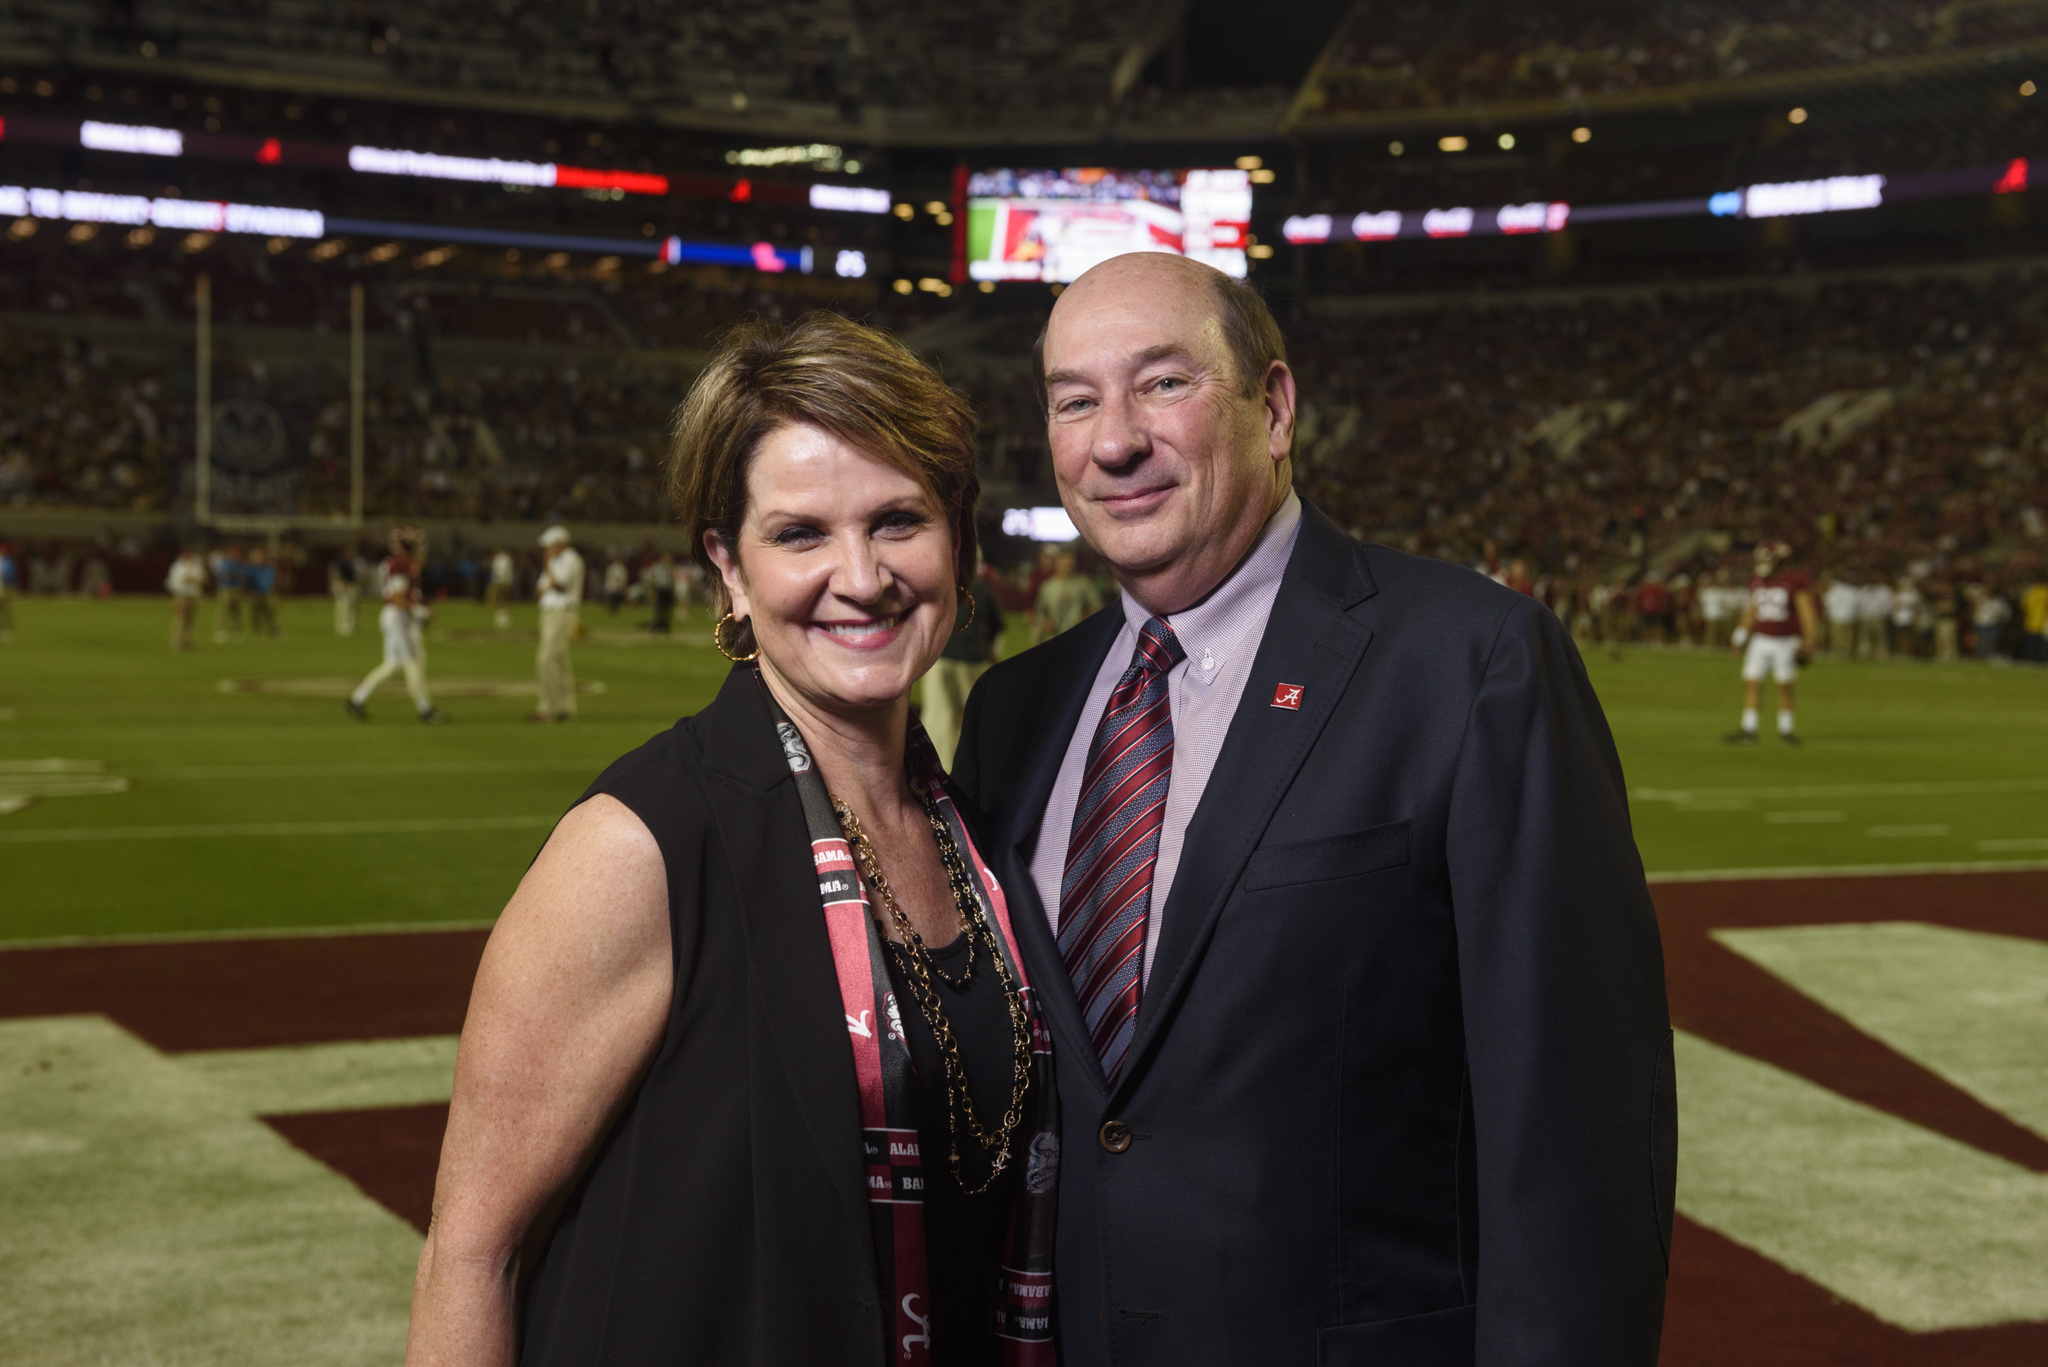 Hewson Stock Gift to University of Alabama is Largest in UA History